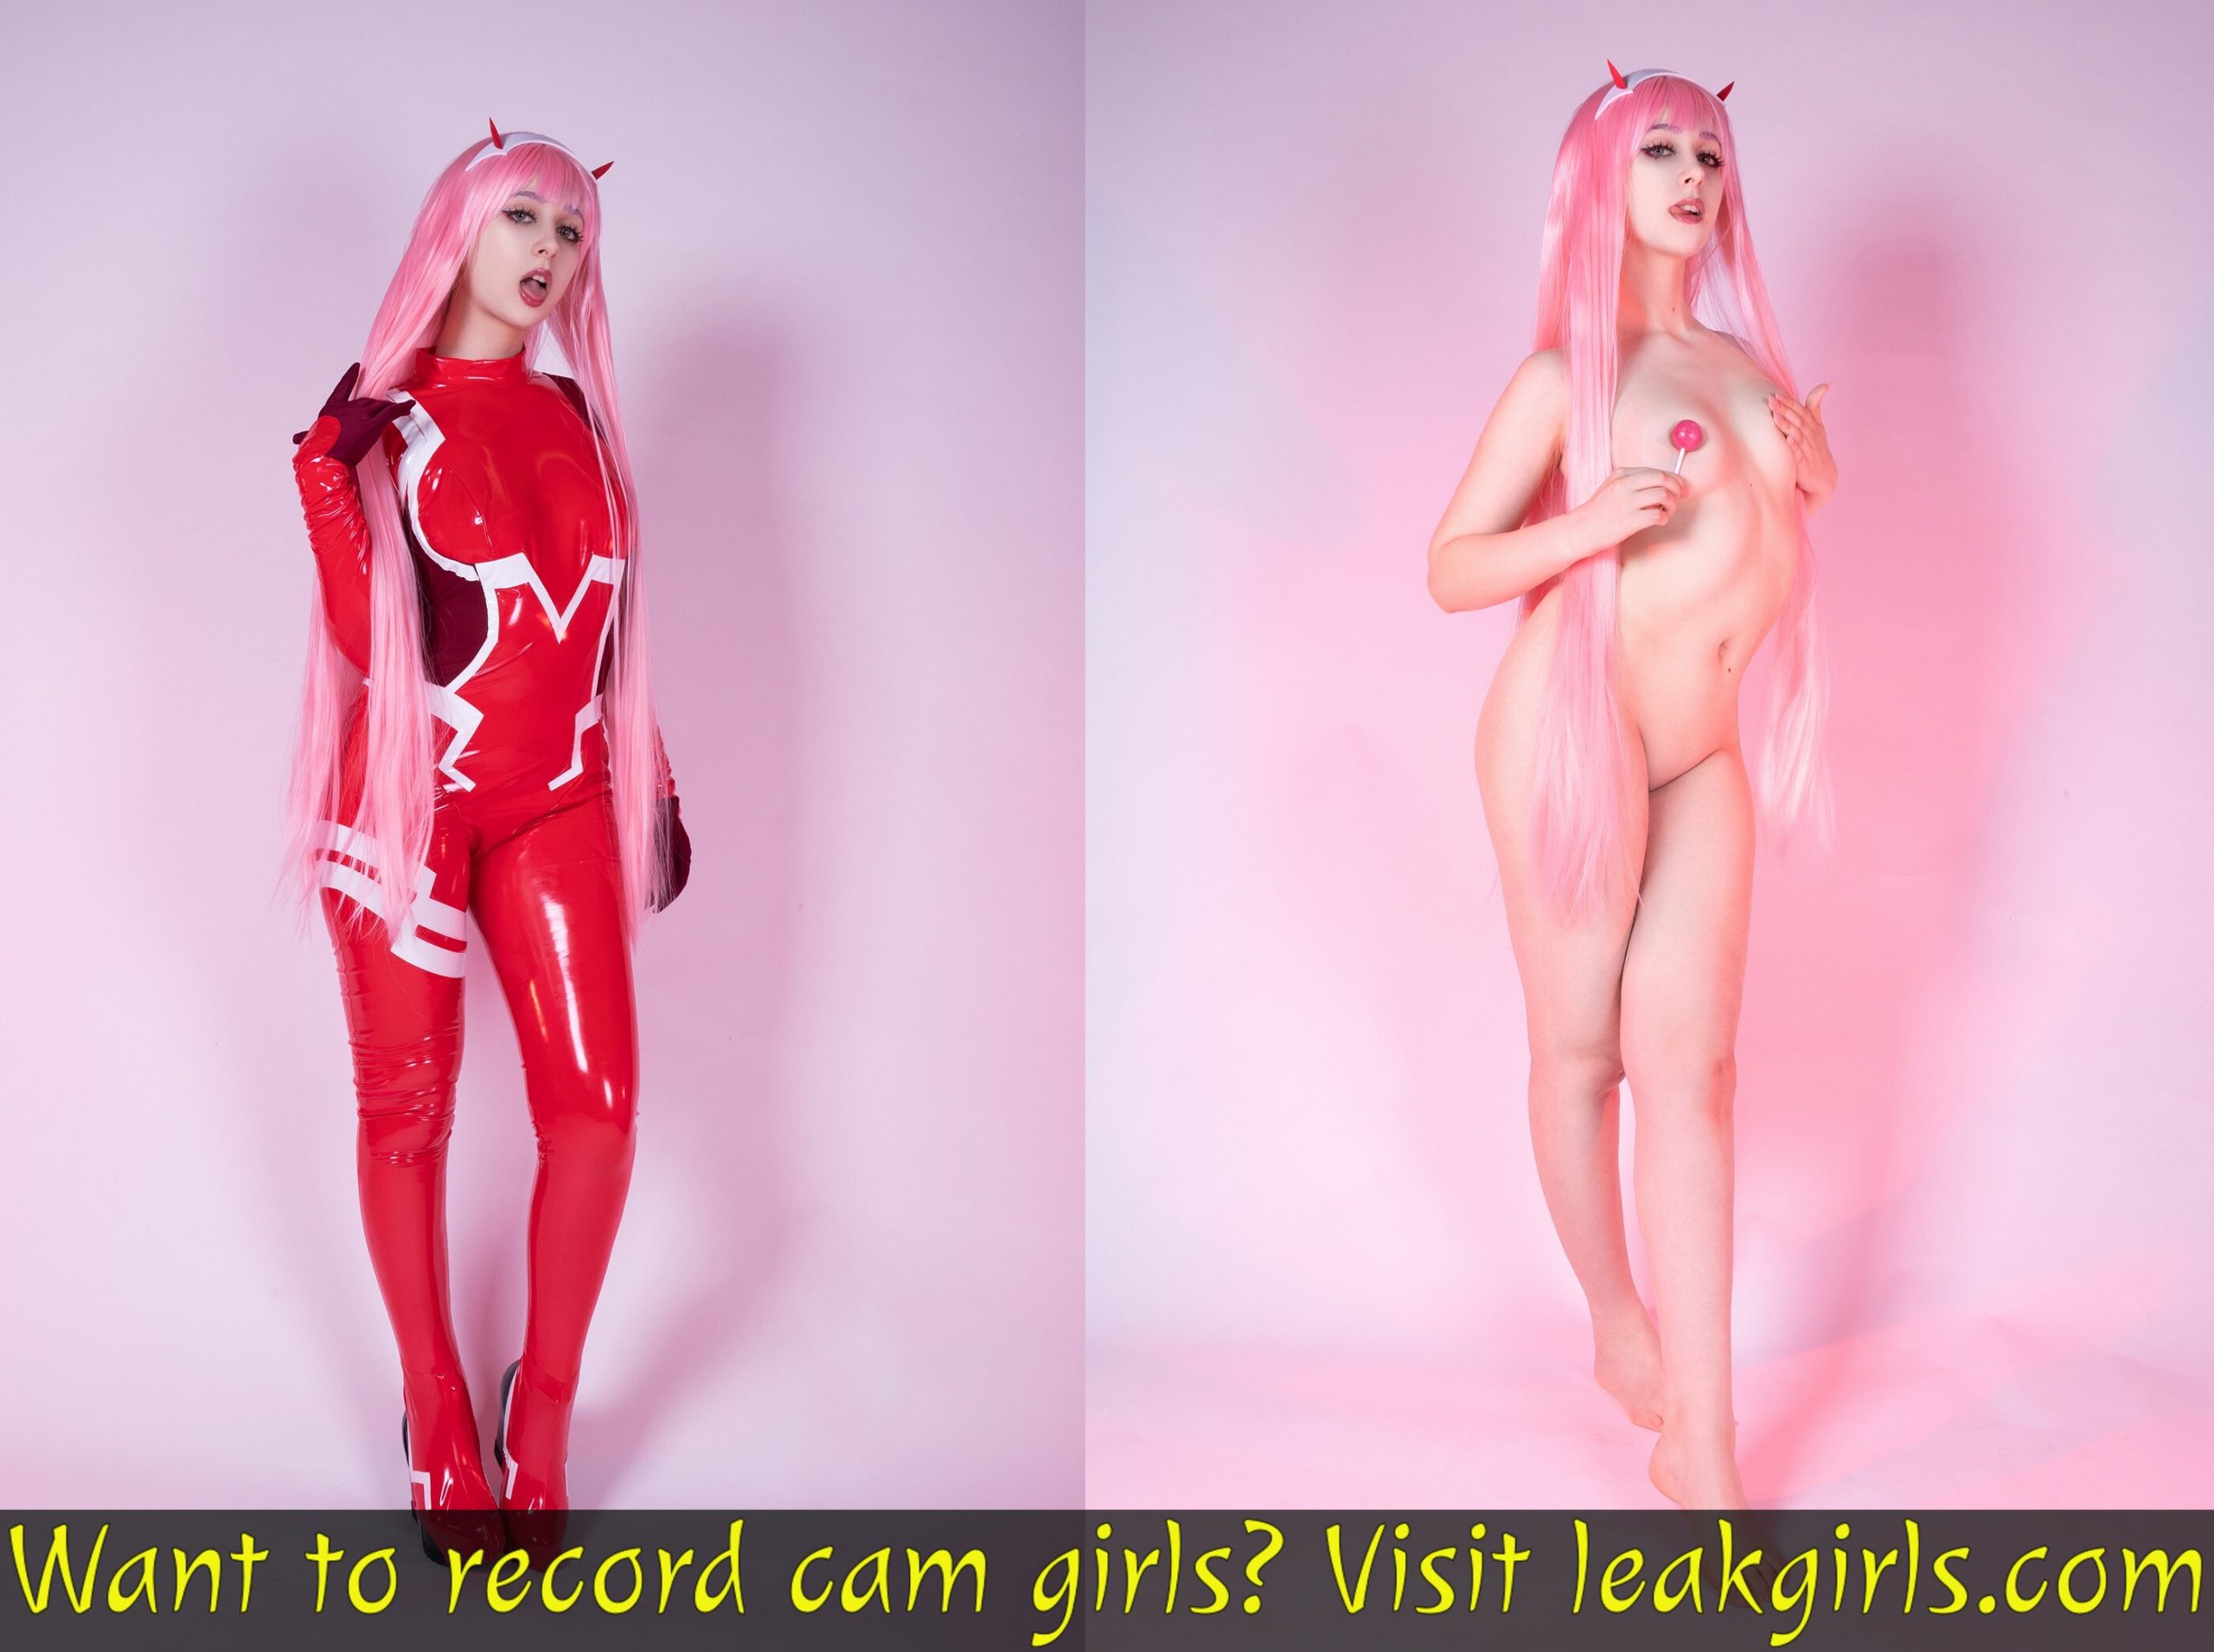 Zero Two On/off By Gumihocosplay